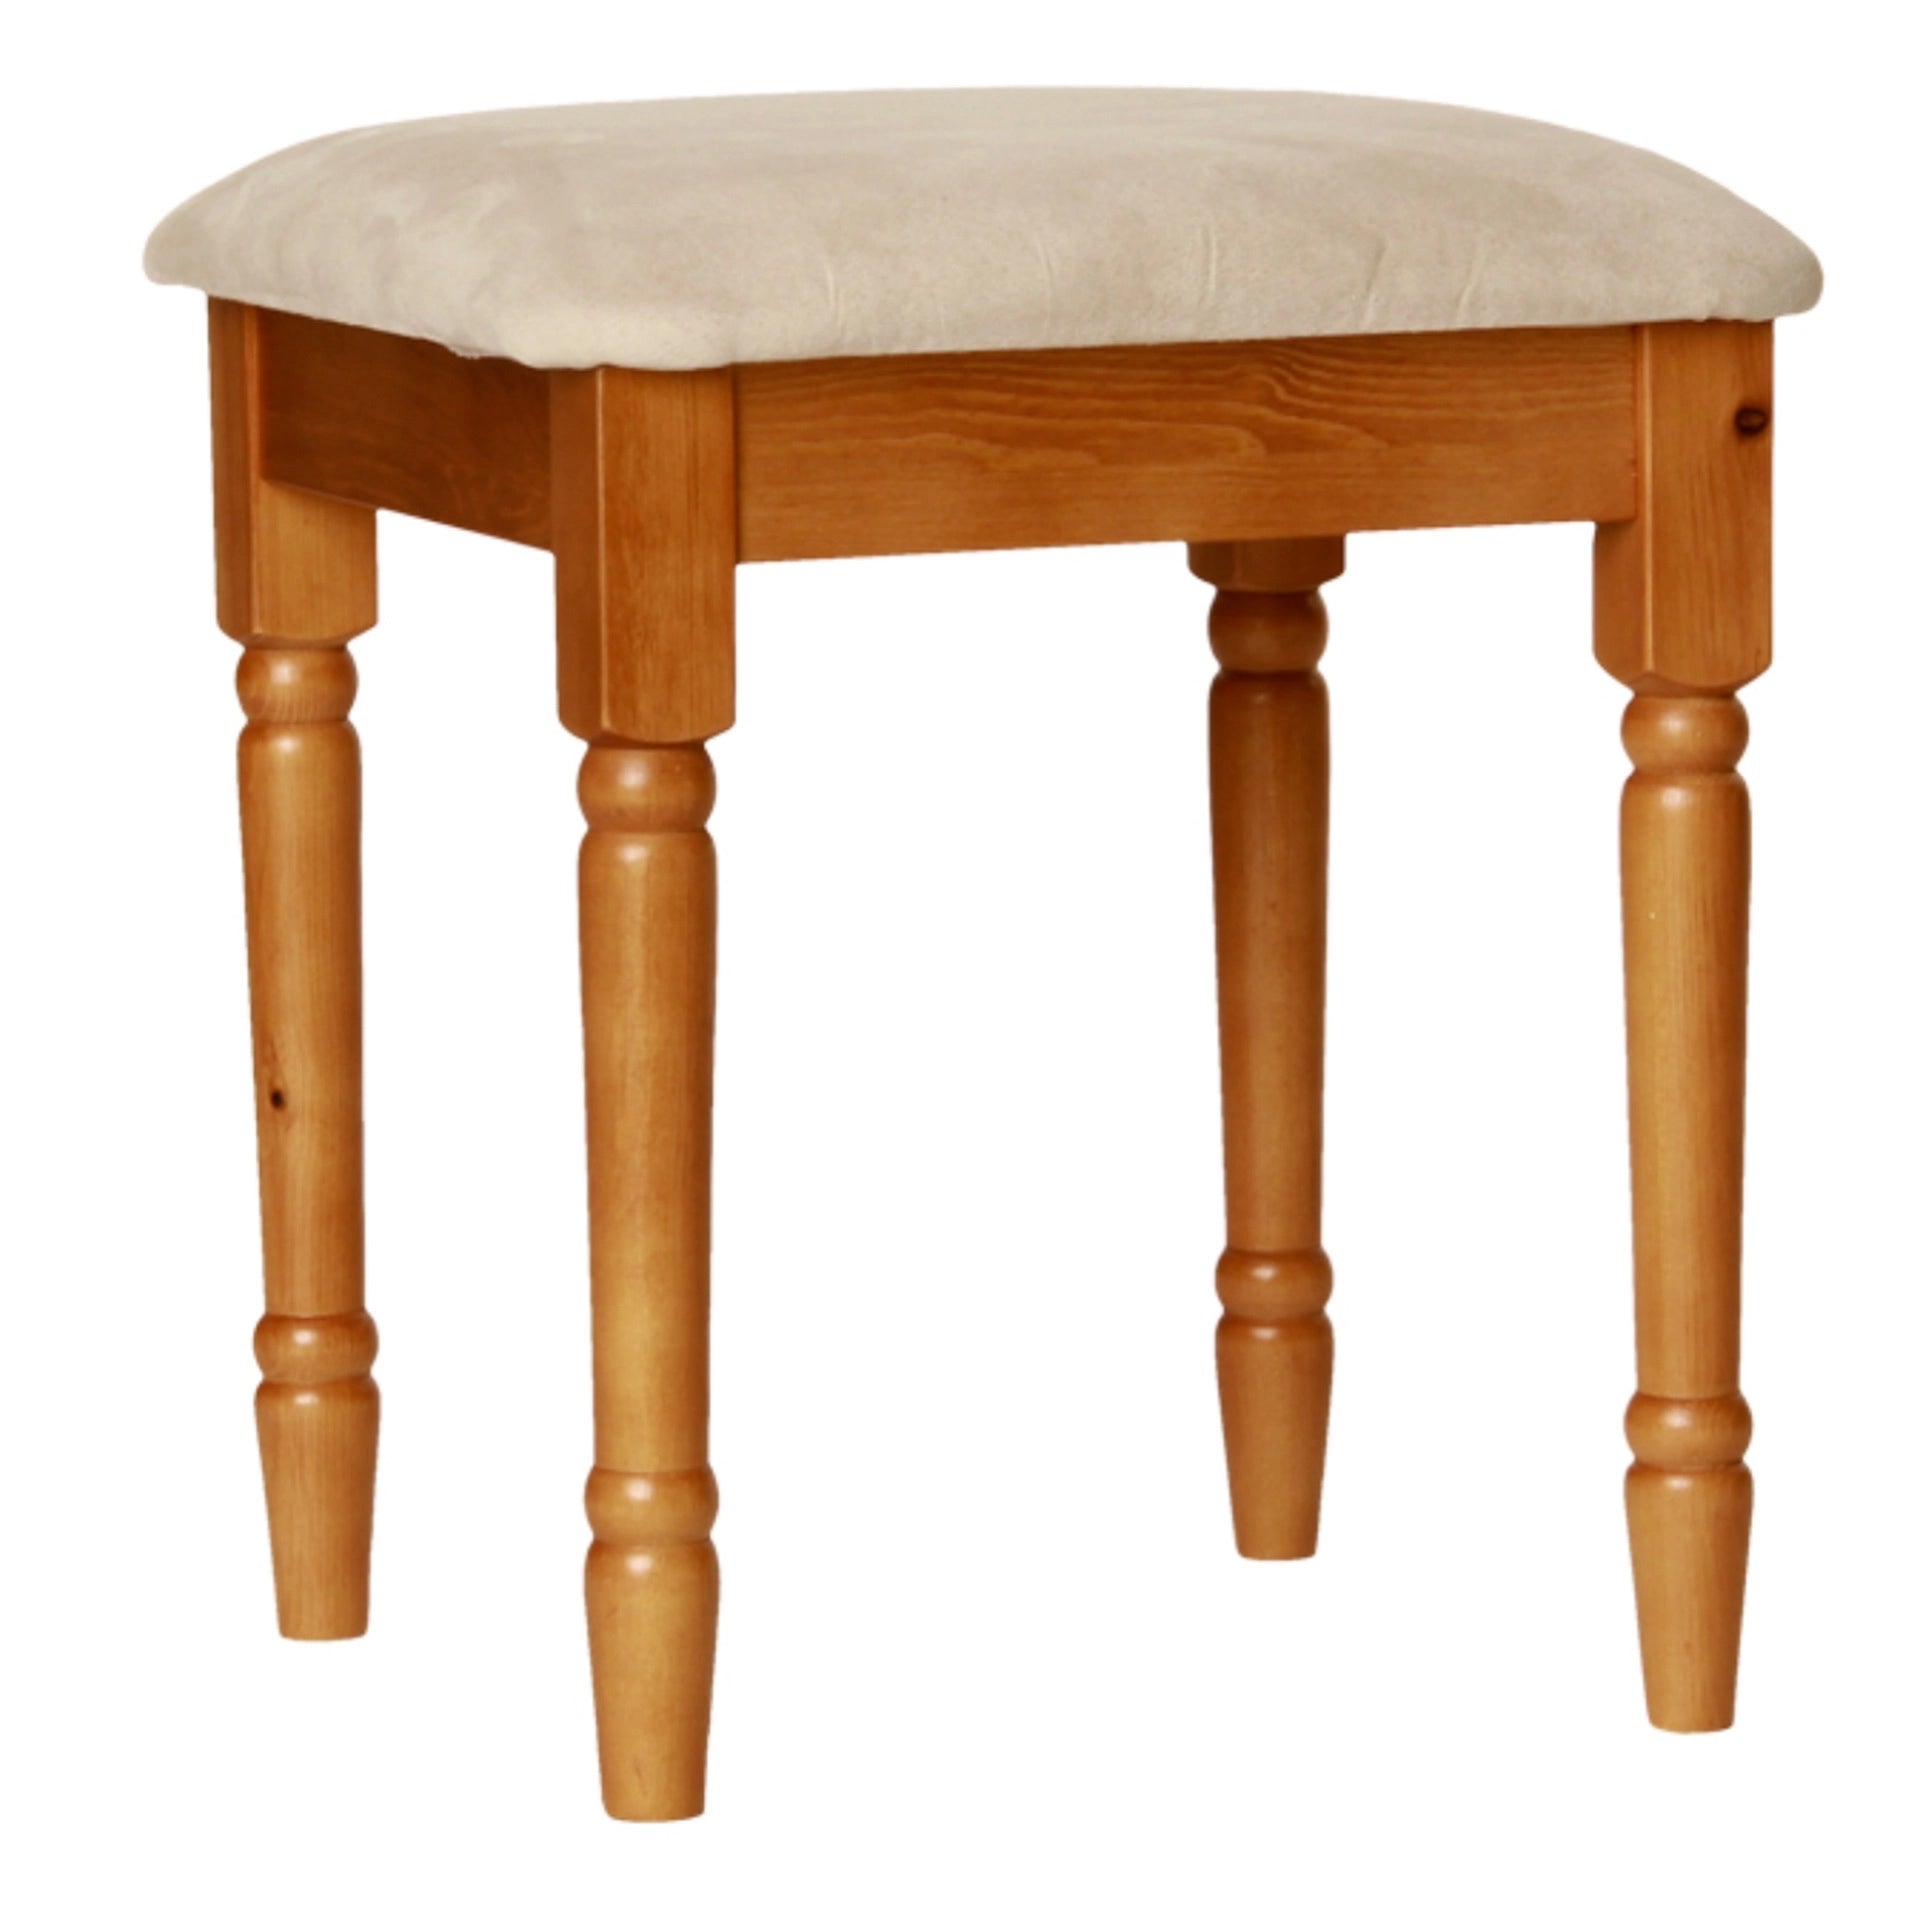 Furniture To Go Nordic Stool, Cherry